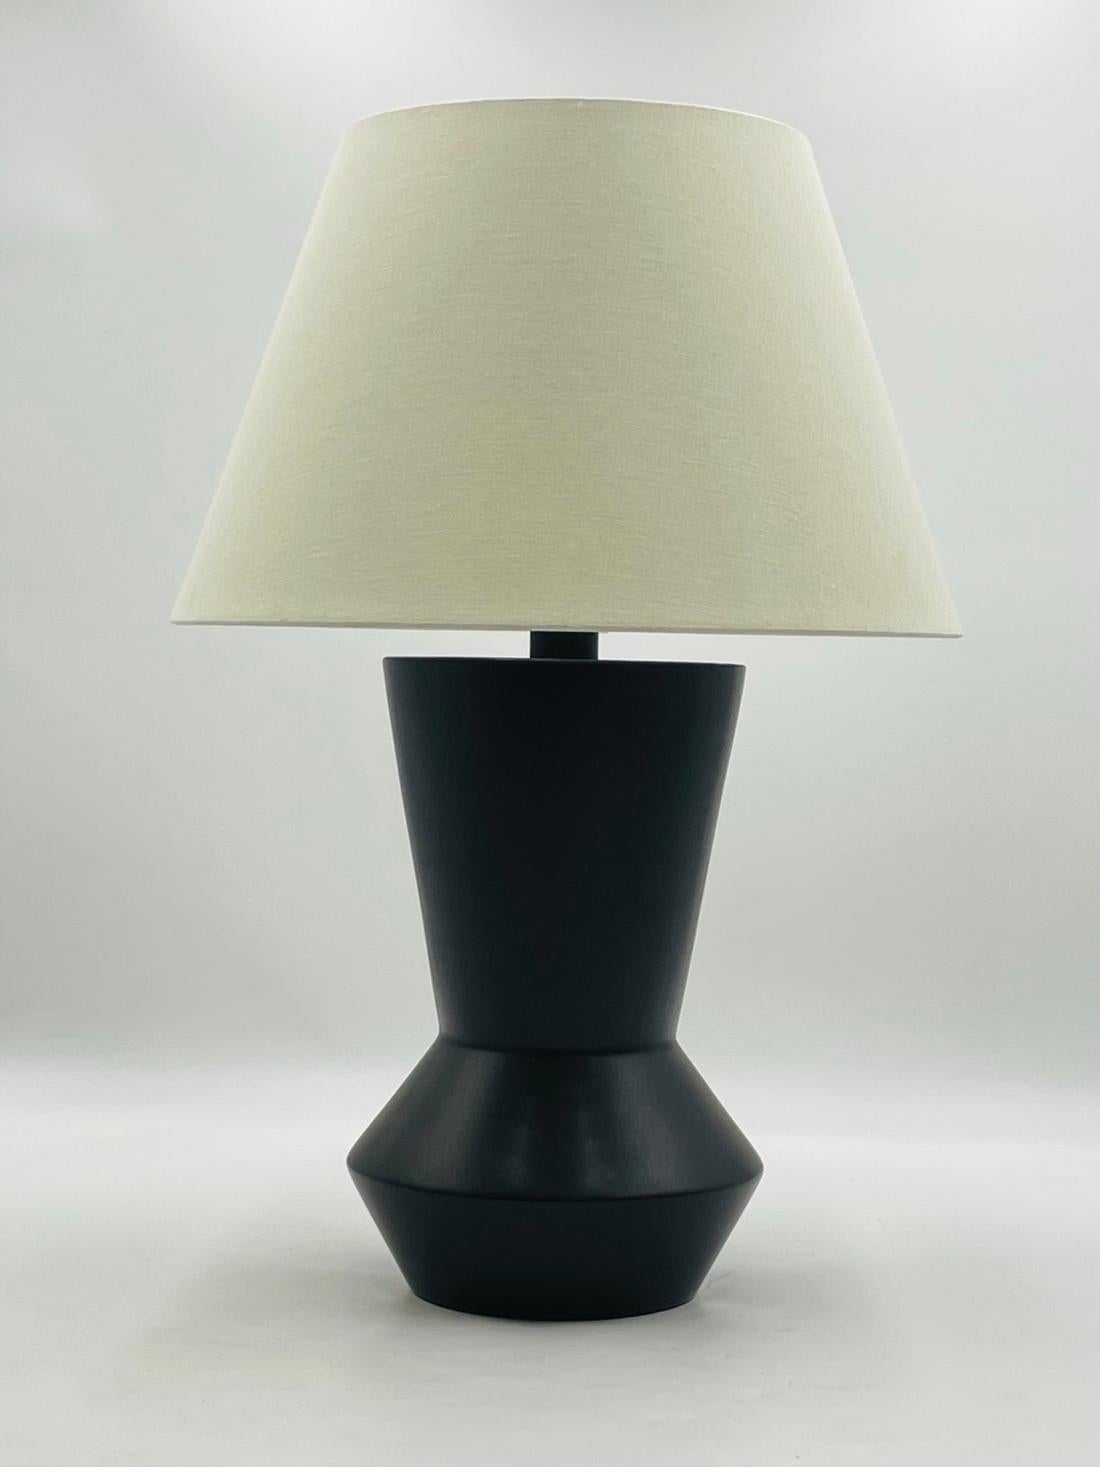 Designer: Chapman & Myers
Material: Ceramic & Linen
Year made: 01/2020

Introducing the exquisite Chapman & Myers Abaco Table Lamp - the perfect addition to your home or office décor. With its sleek black finish and elegant white shade, this